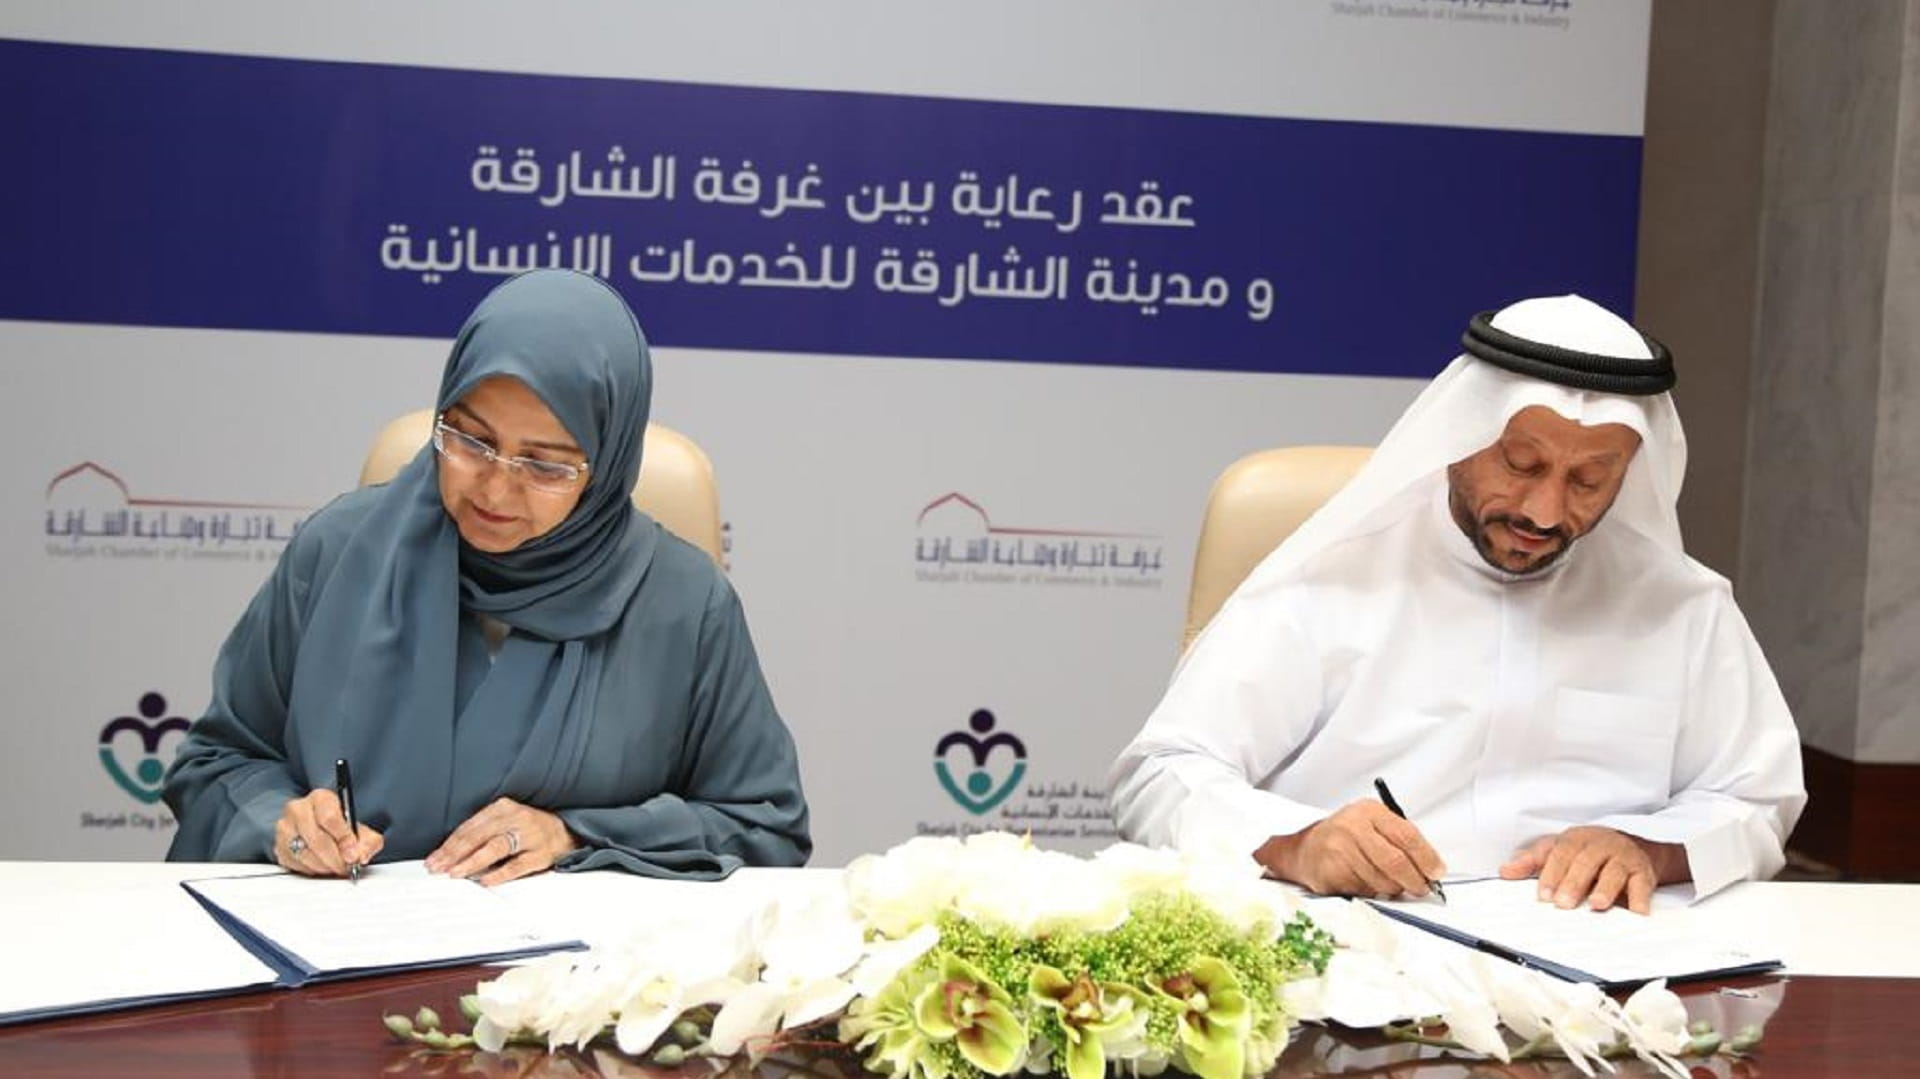 "SHARJAH CHAMBER" CONCLUDES A SPONSORSHIP CONTRACT WITH SCHS TO ENHANCE THE QUALITY 